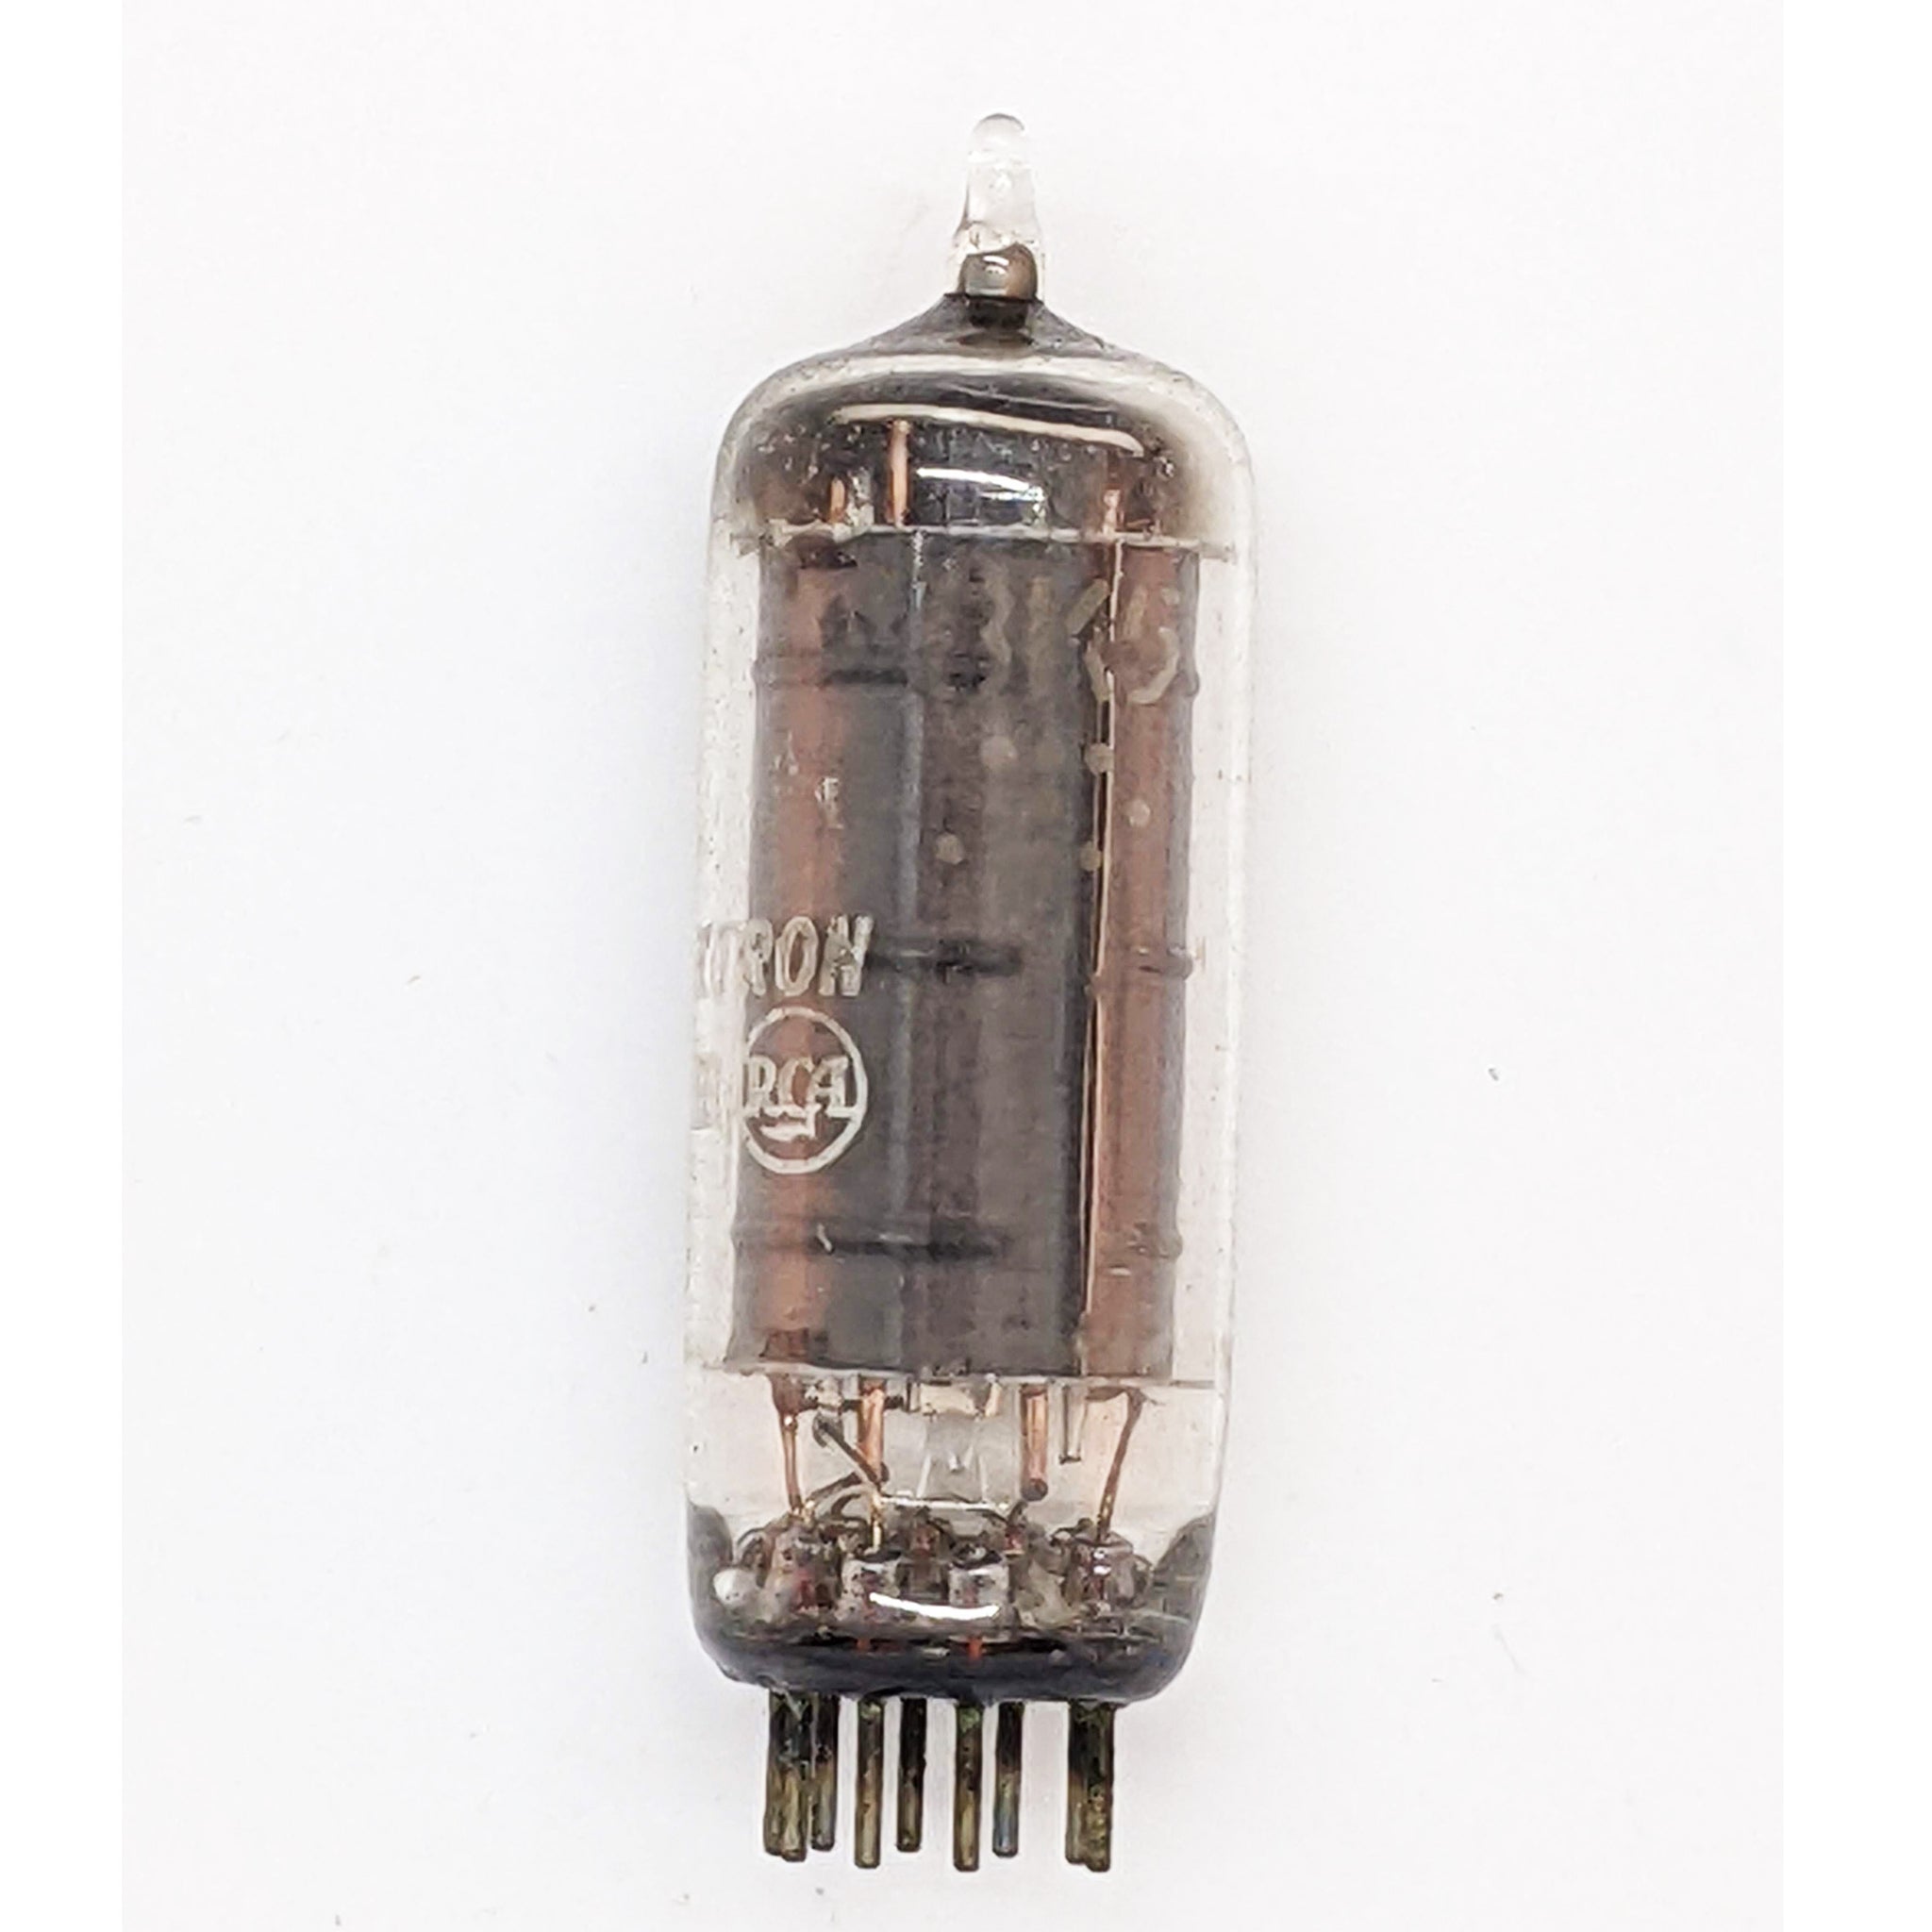 6BK5 RCA Vacuum Tube, Tested Good, Ships Quick From Mississippi